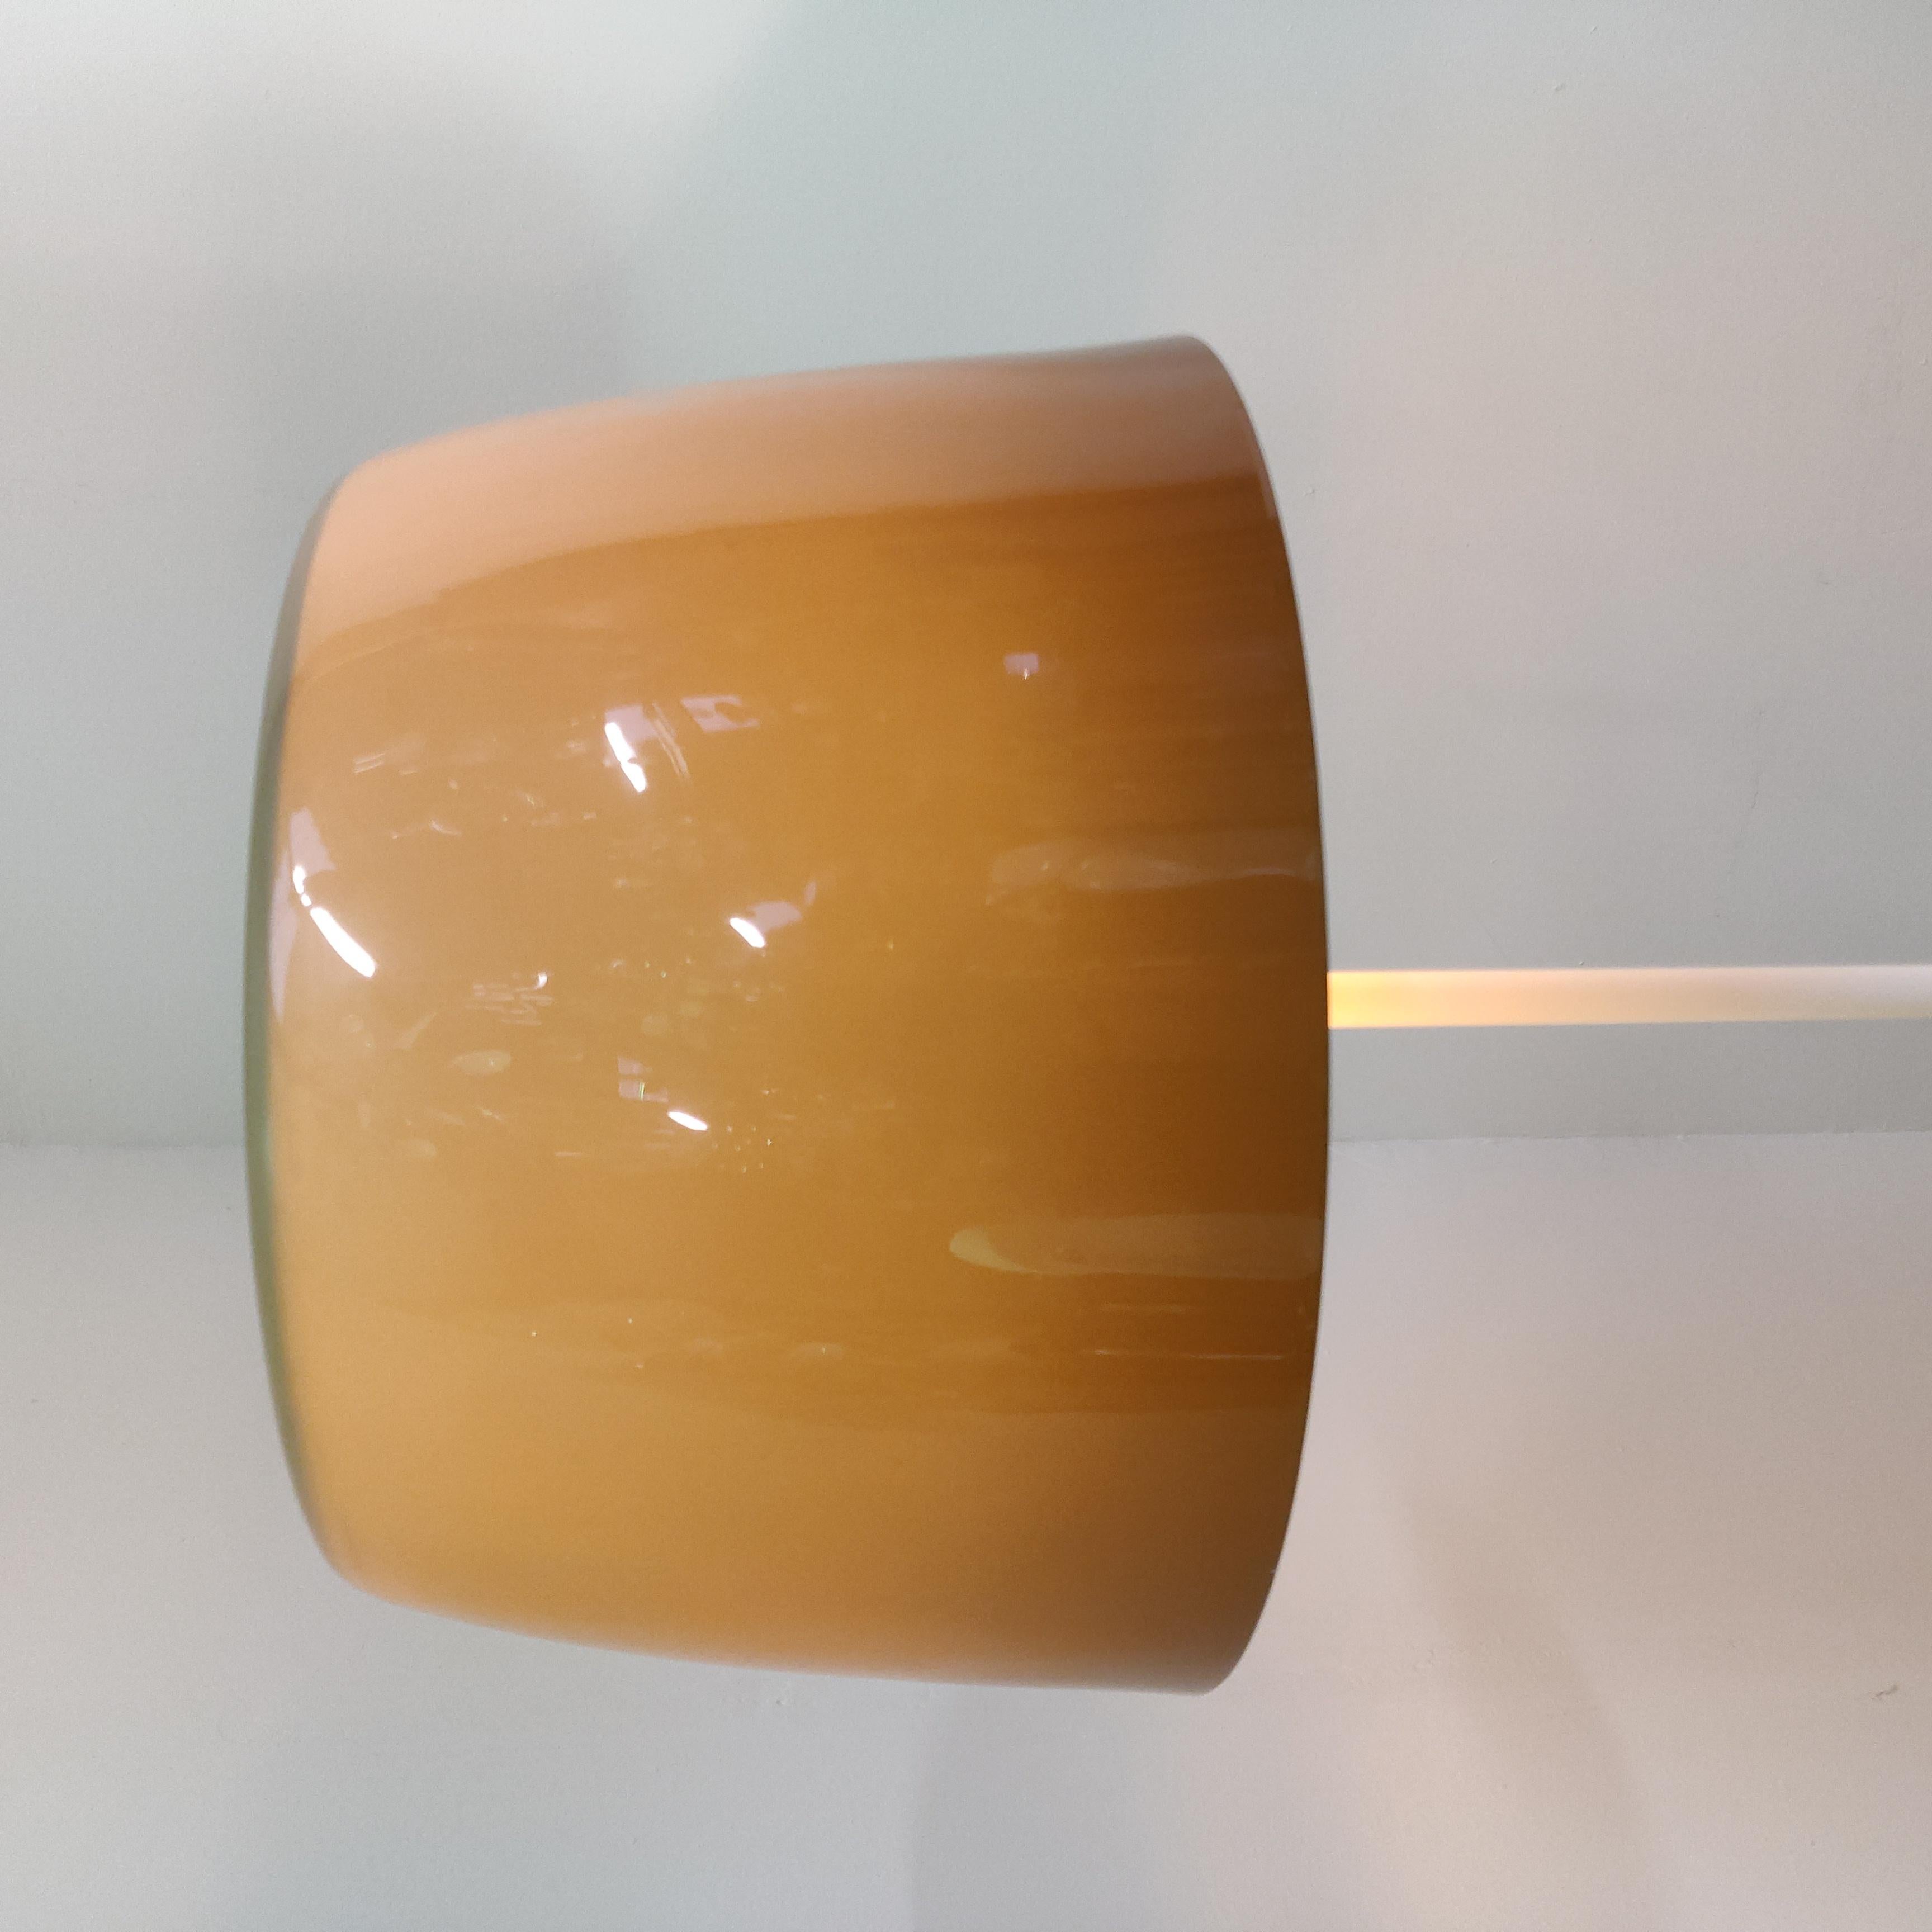 Minimalistic floor lamp in style of Harvey Guzzini, with lucent brown acrylic lampshade, switch for only top light, top light and shade or only shade light.
